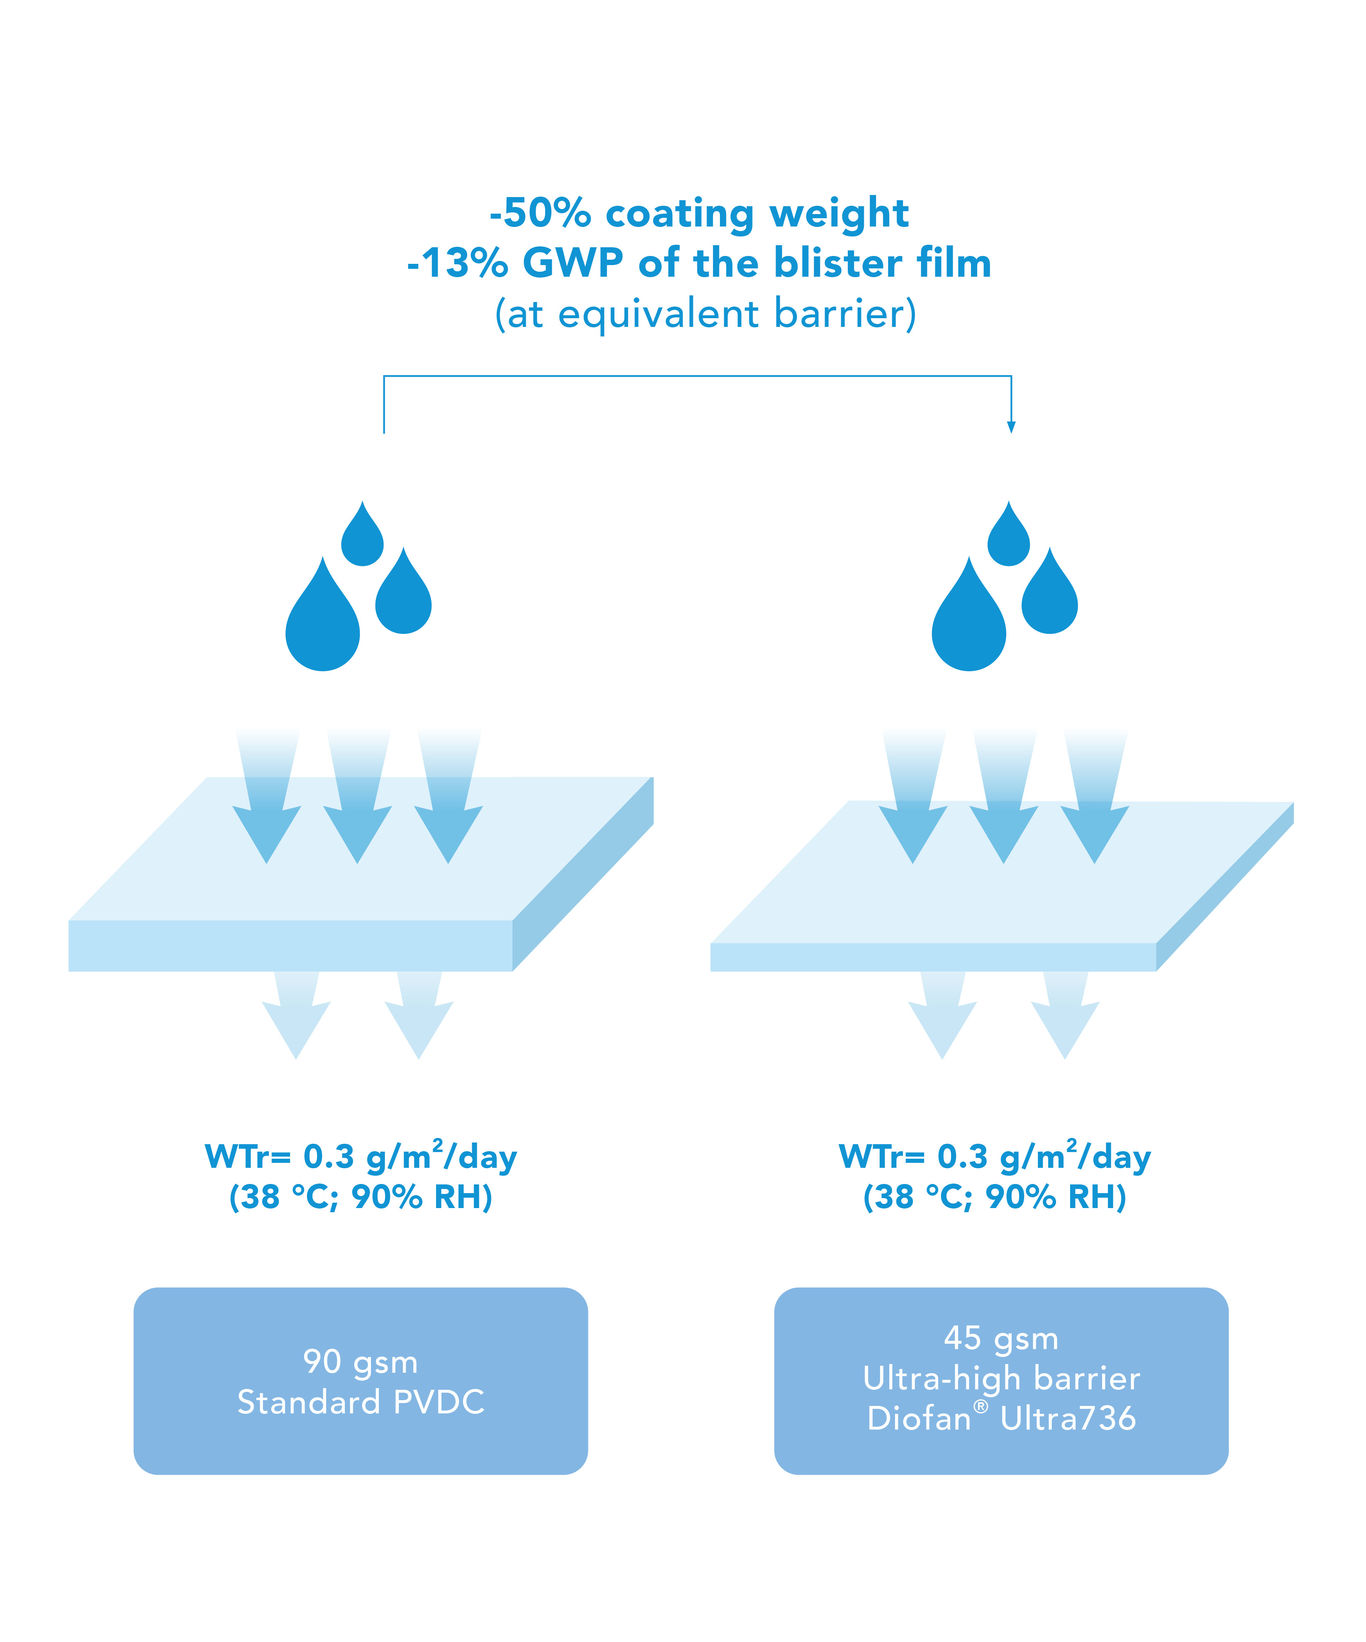 Solvay launches ultra-high barrier PVDC coating solution for sustainable pharma blister films